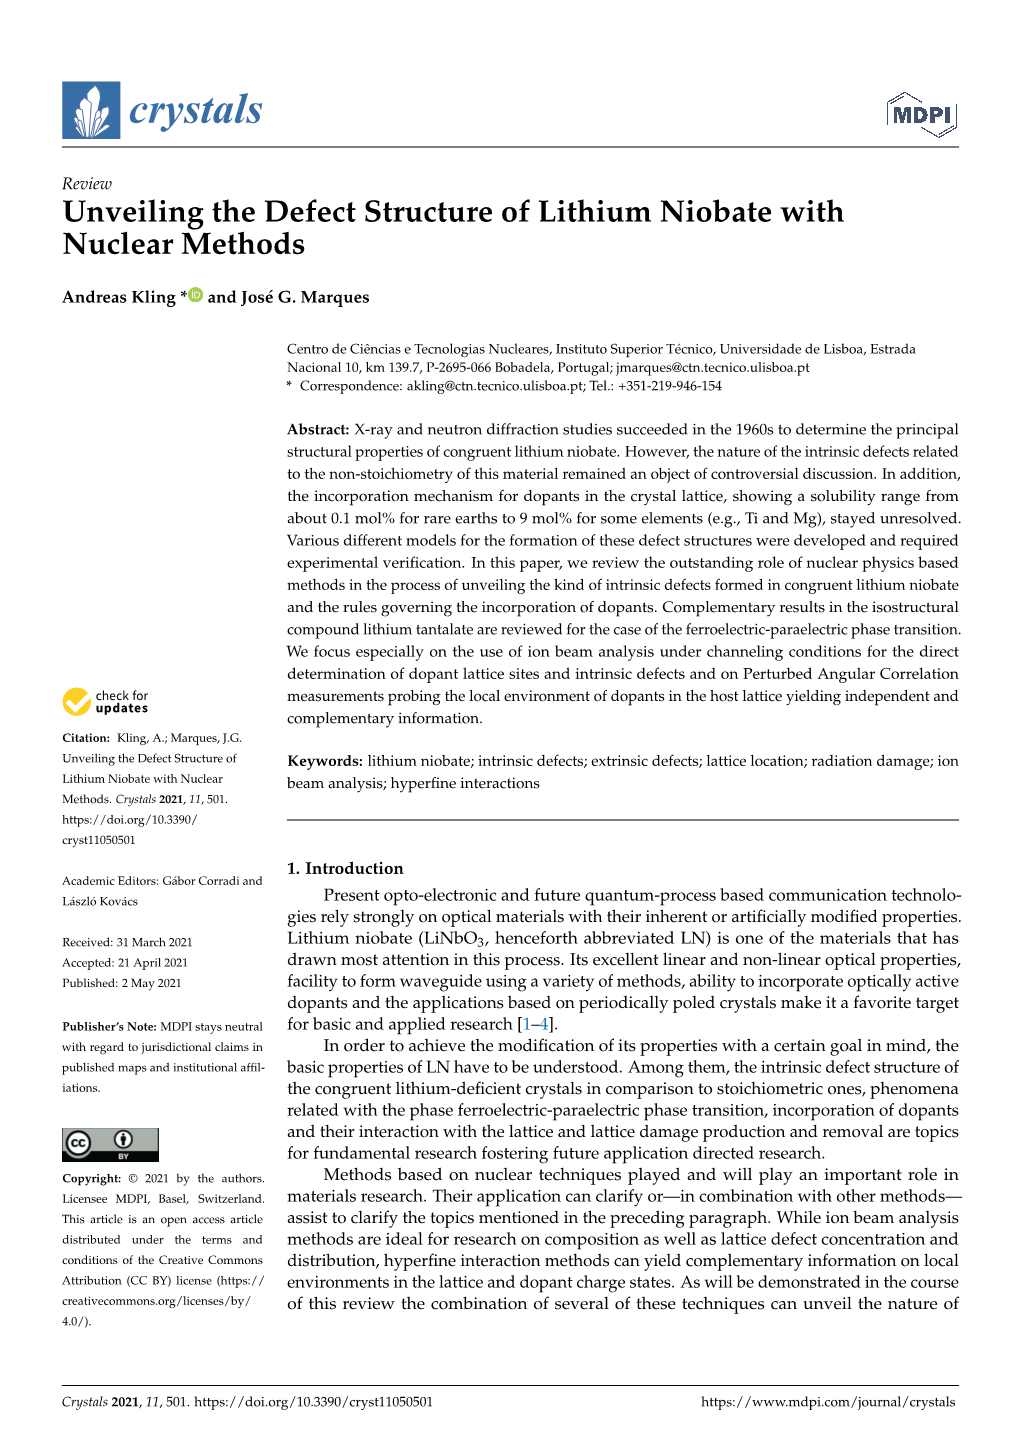 Unveiling the Defect Structure of Lithium Niobate with Nuclear Methods